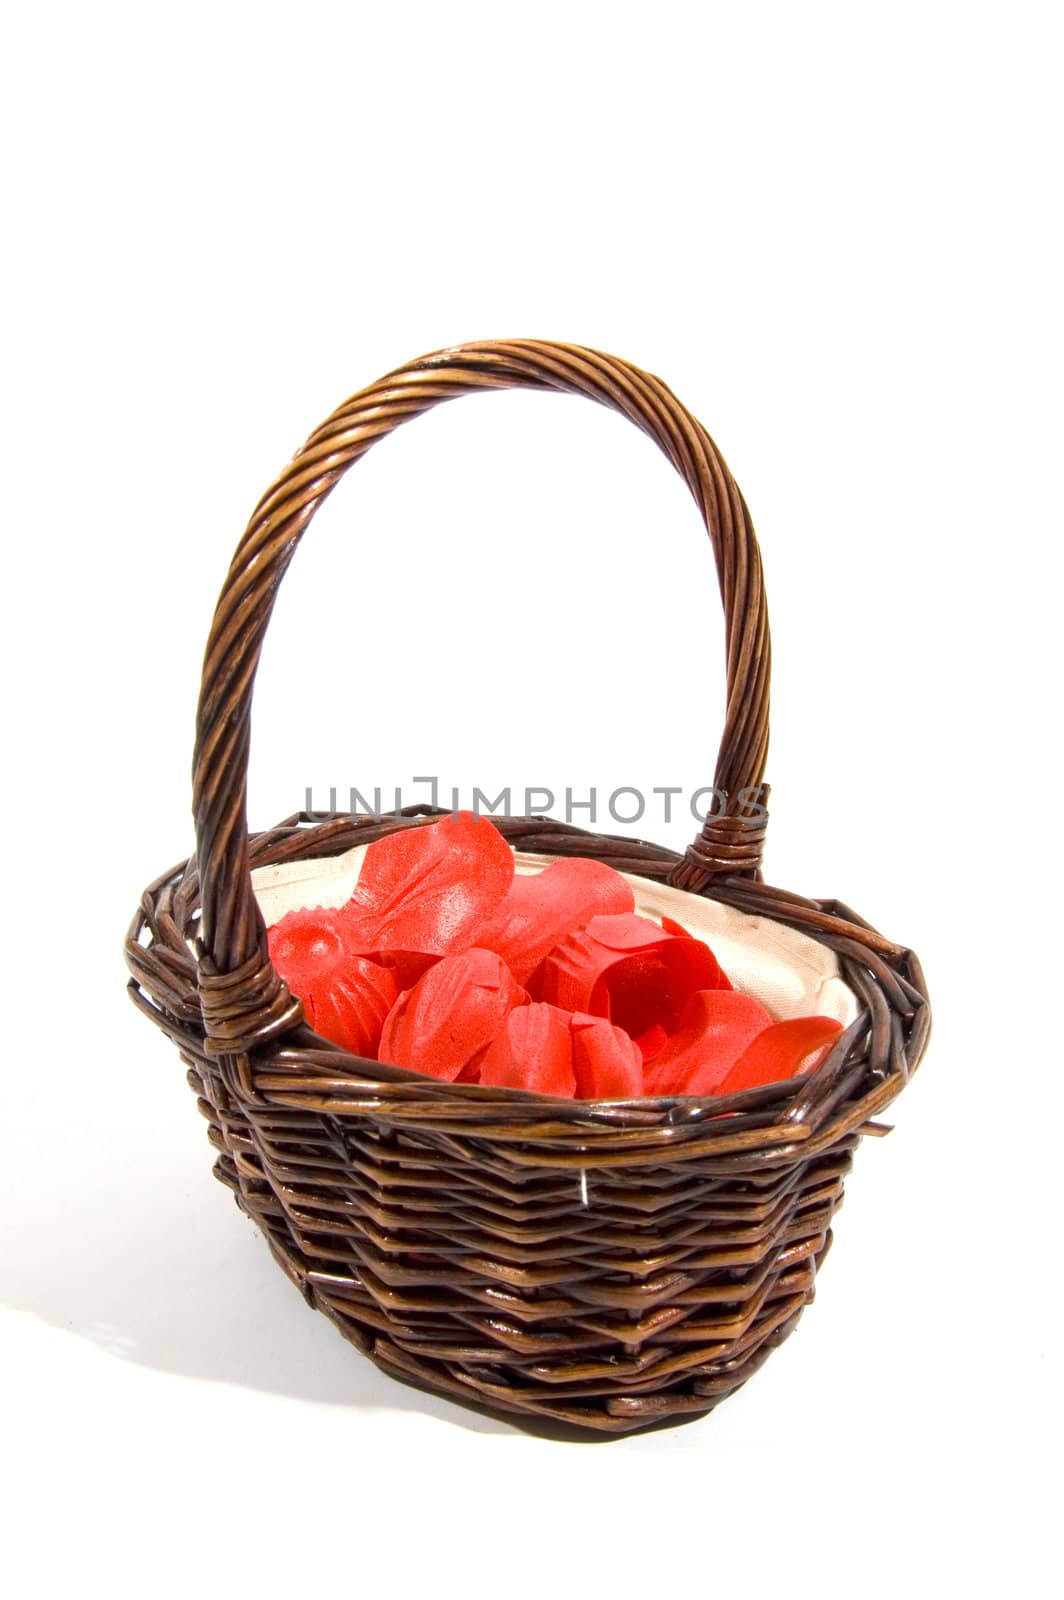 wicker basket filled with red rose peddles on a white background